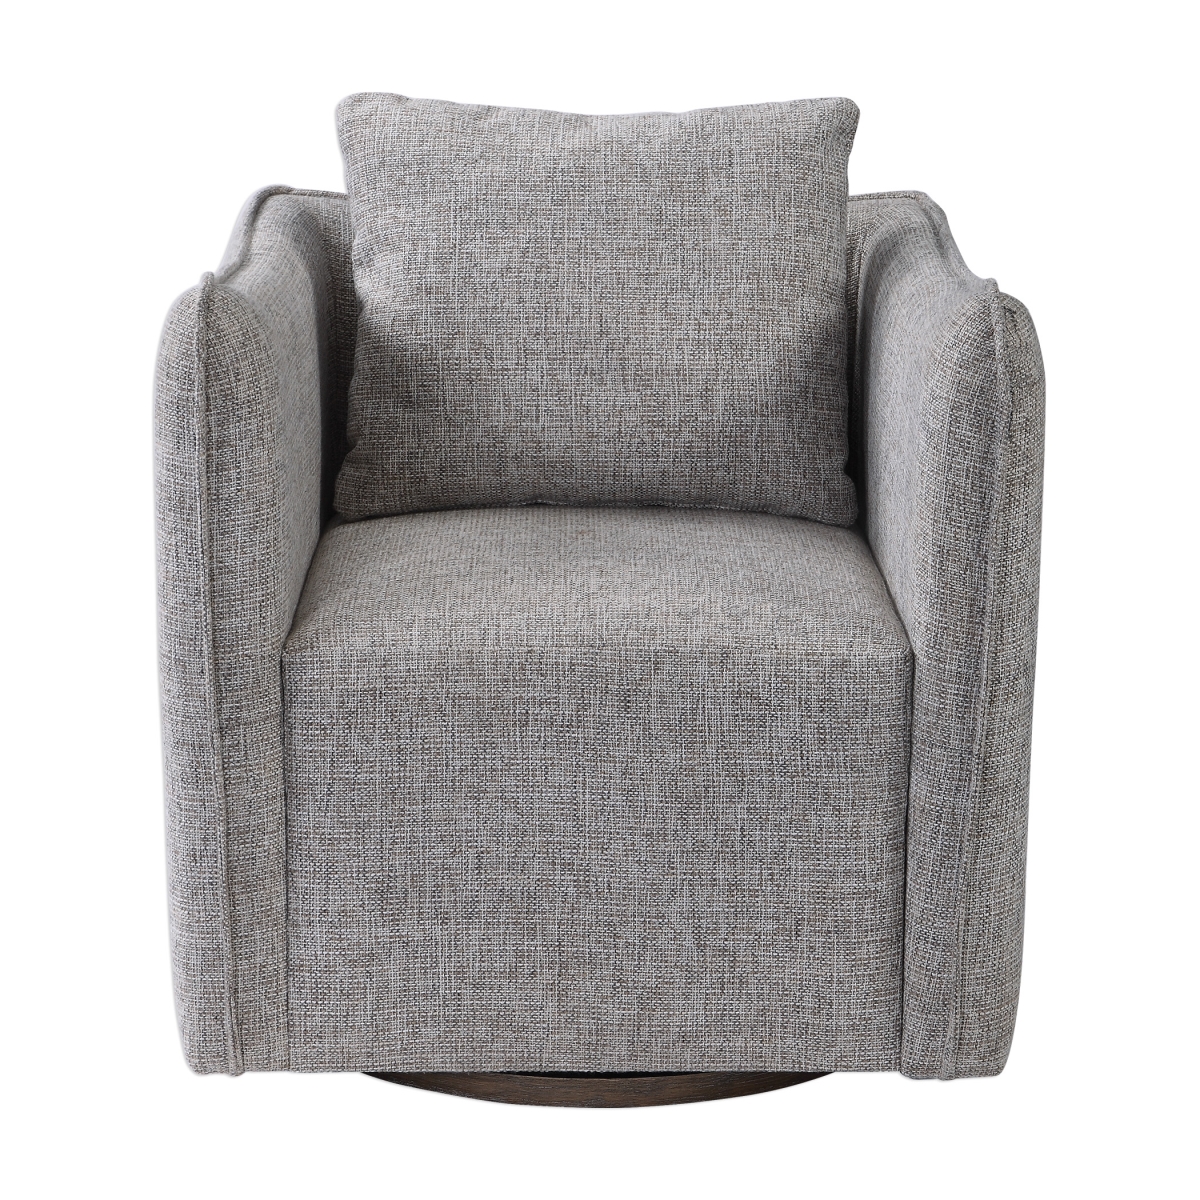 Picture of 212 Main 23492 19 in. Corben Swivel Chair  Gray